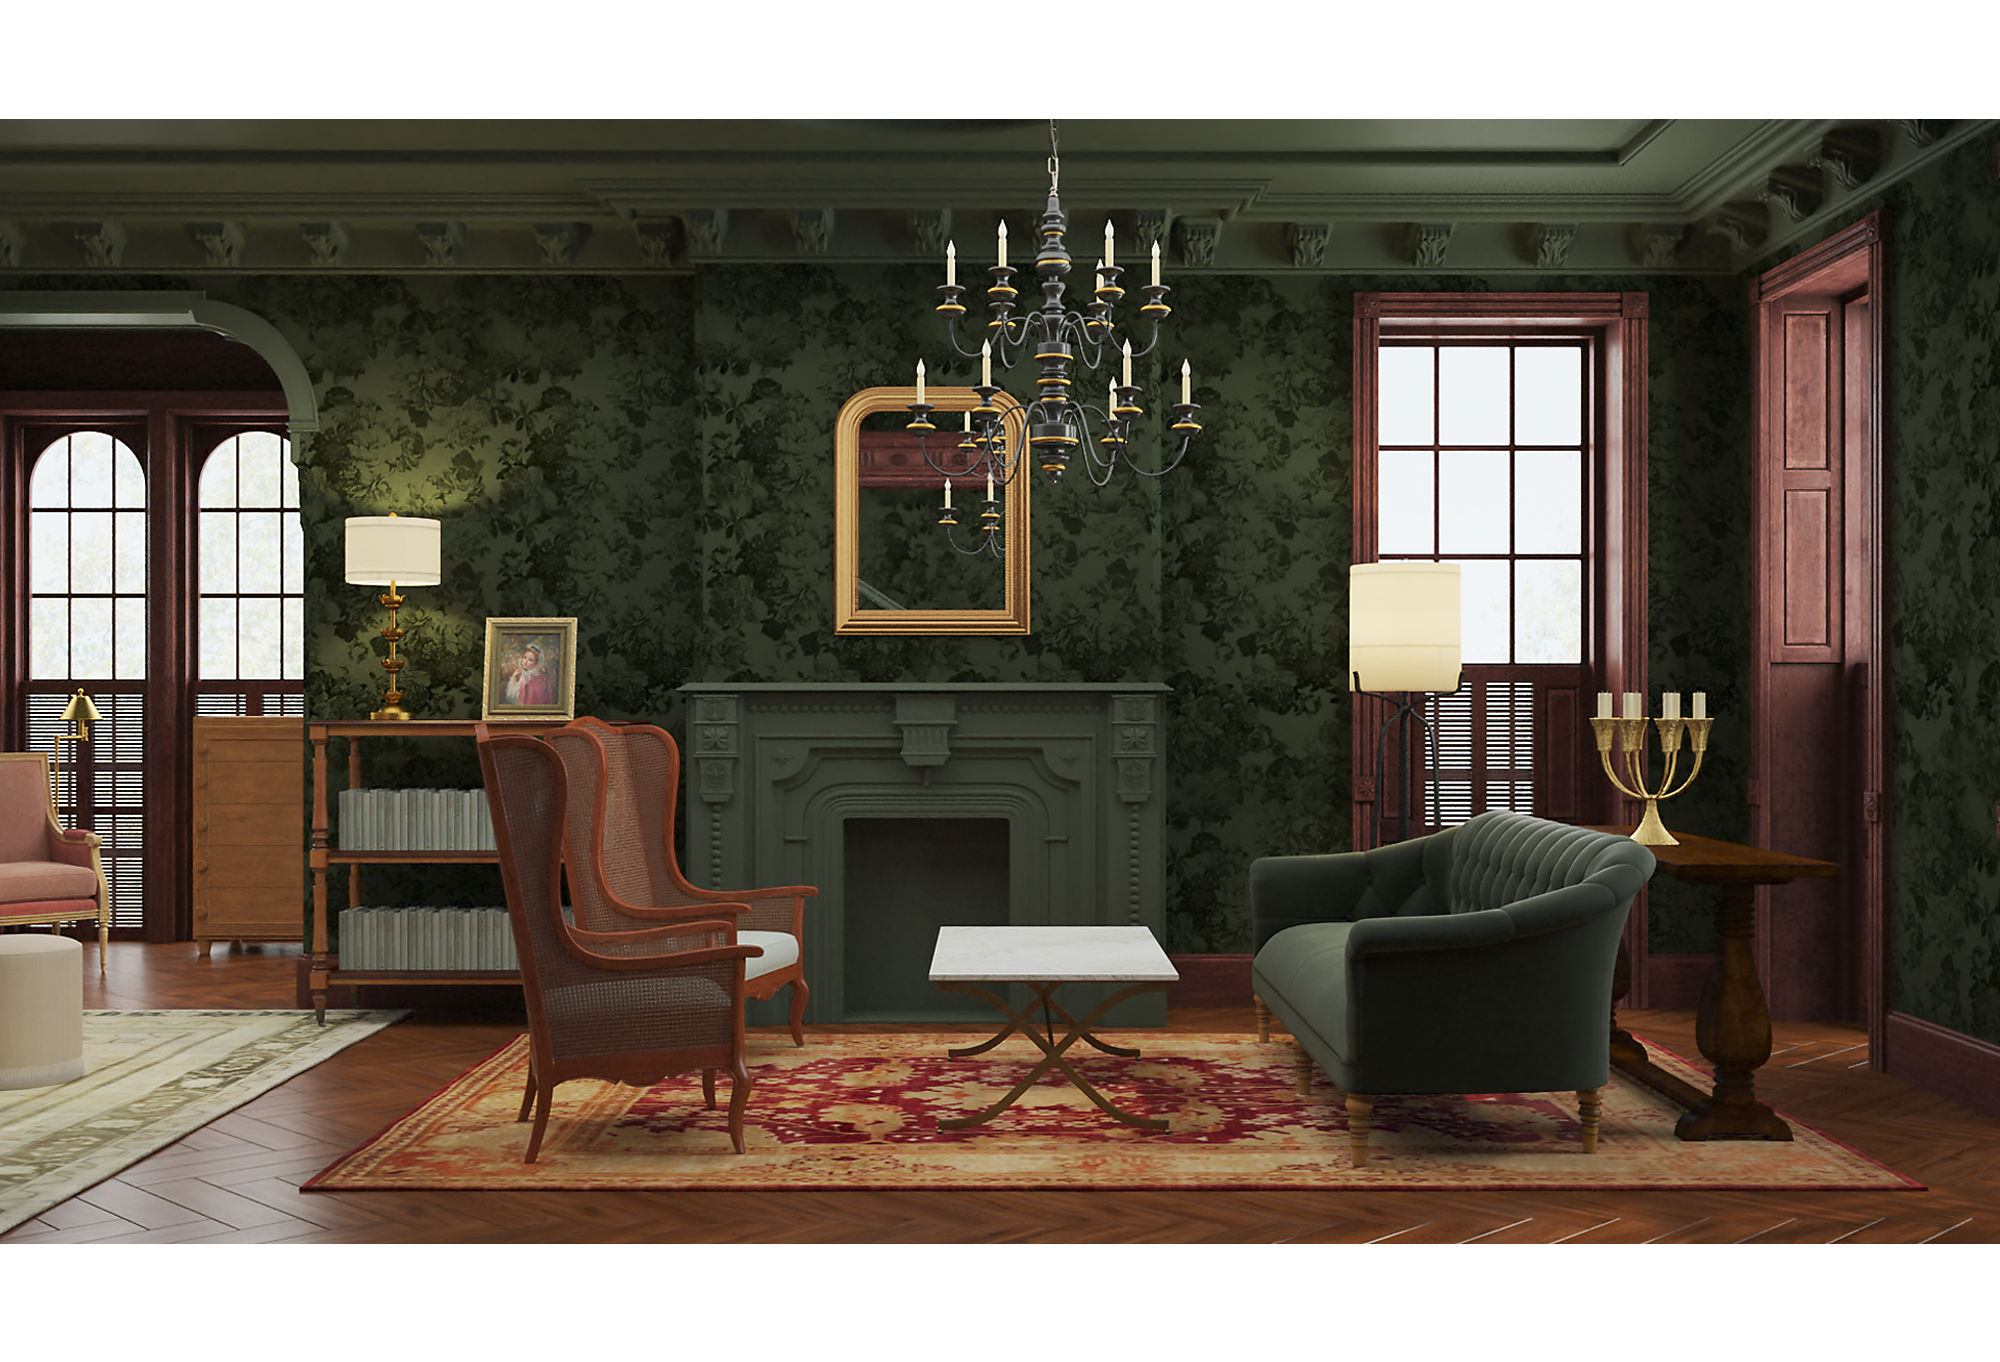 The main sitting area is wrapped in a moody green with crisp accents.
